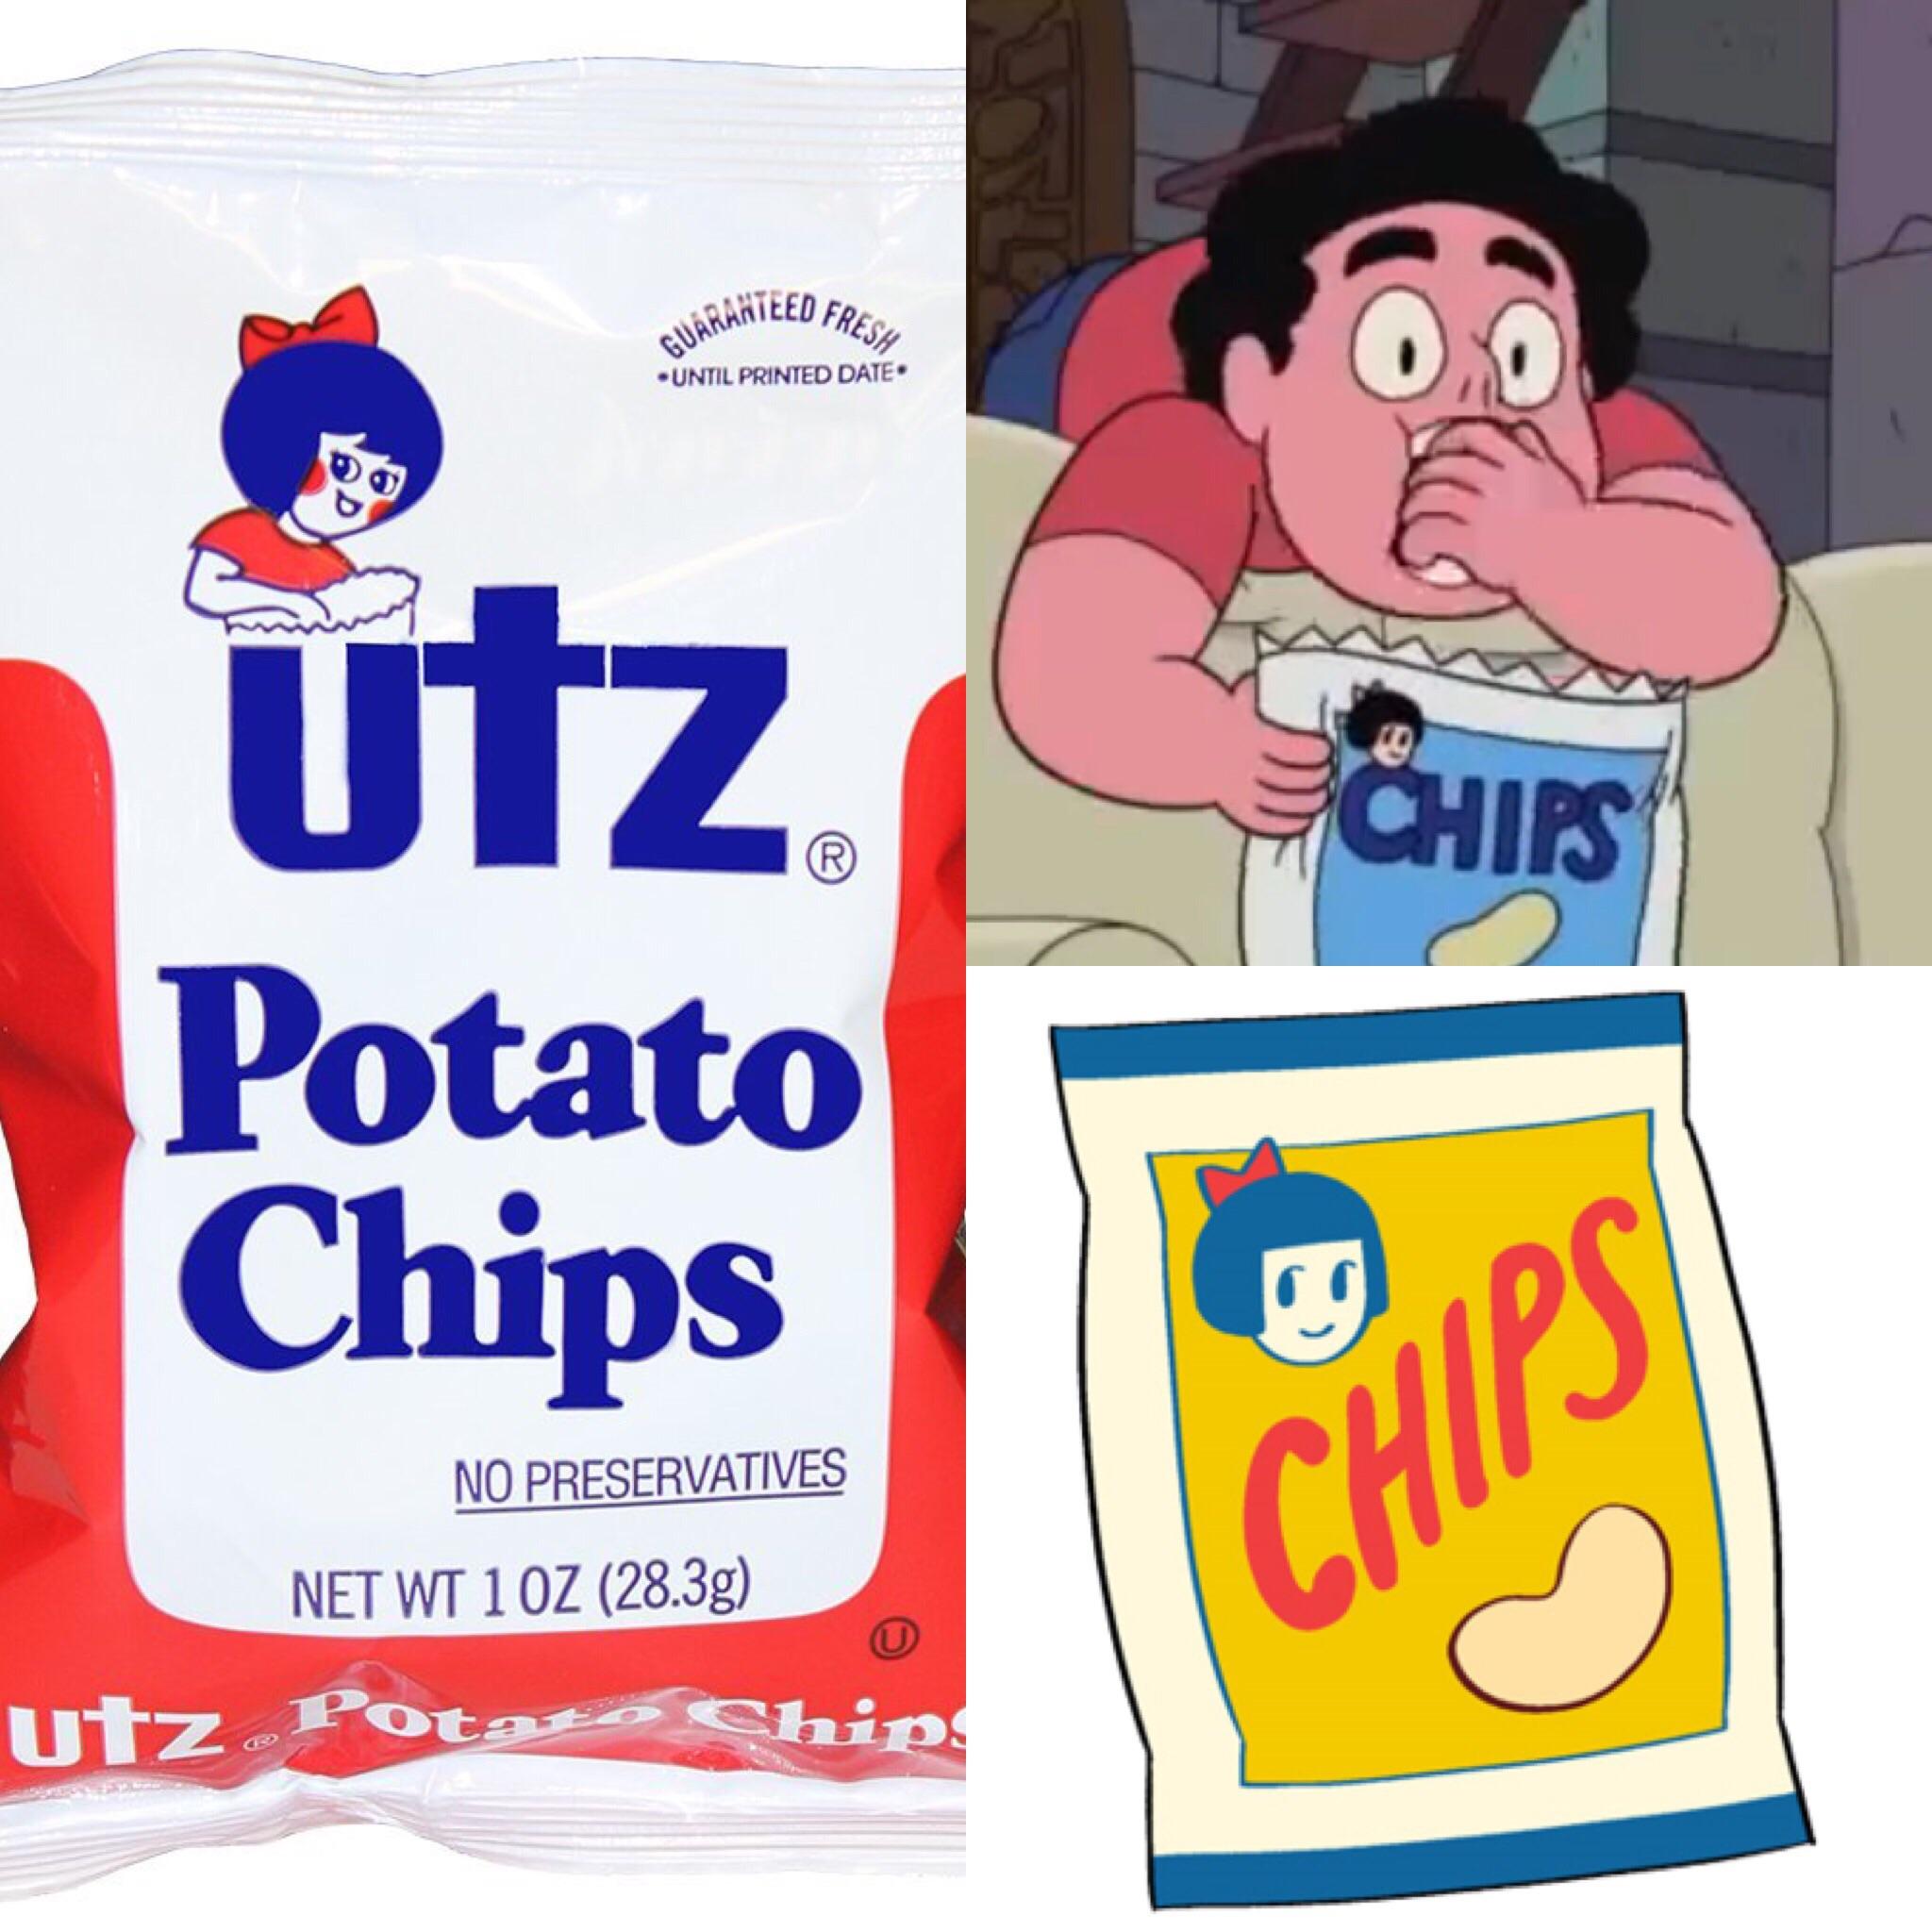 Utz Logo - The logo on the chips in SU looks like the same logo as the local